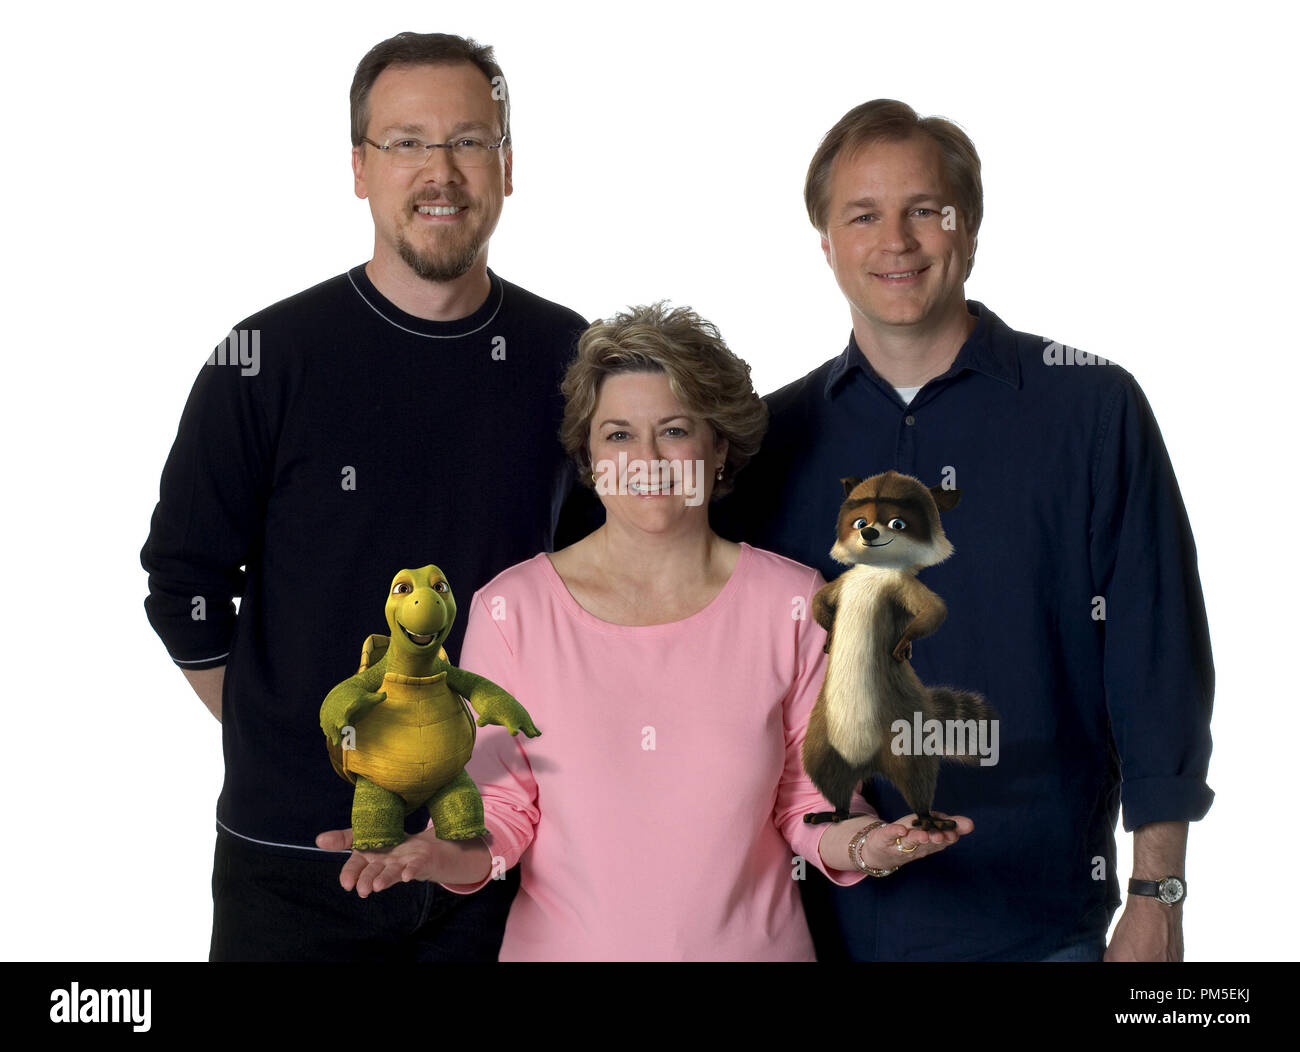 Film Still / Publicity Still from 'Over The Hedge' Director Tim Johnson, Director Karey Kirkpatrick, Producer Bonnie Arnold, Verne, RJ © 2006 Dreamworks  File Reference # 30737053THA  For Editorial Use Only -  All Rights Reserved Stock Photo